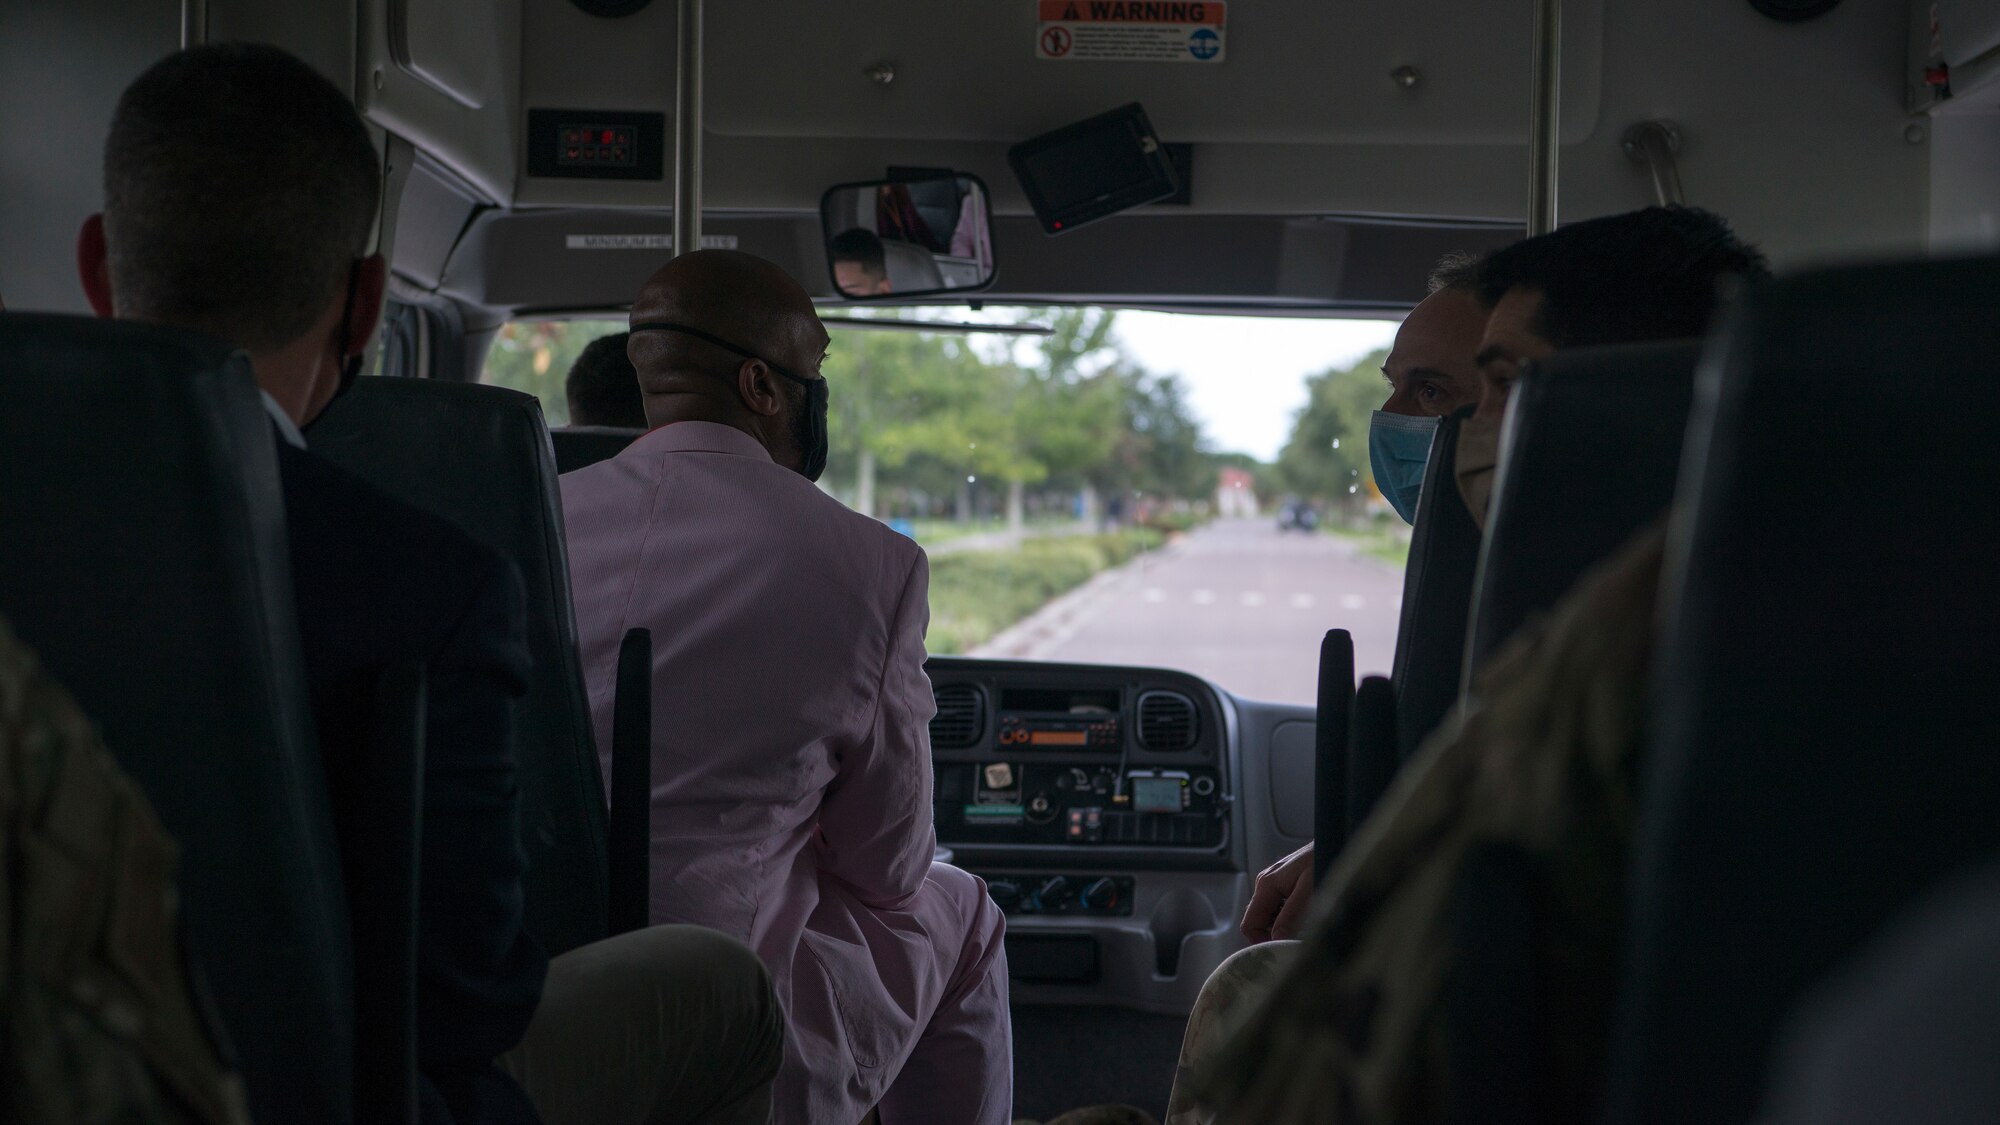 6th Air Refueling Wing and 6th Mission Support Group leadership travel with Hon. John Henderson, the Assistant Secretary of the Air Force for Environment, Installations and Energy, to base housing on MacDill Air Force Base, Fla., June 10, 2020.